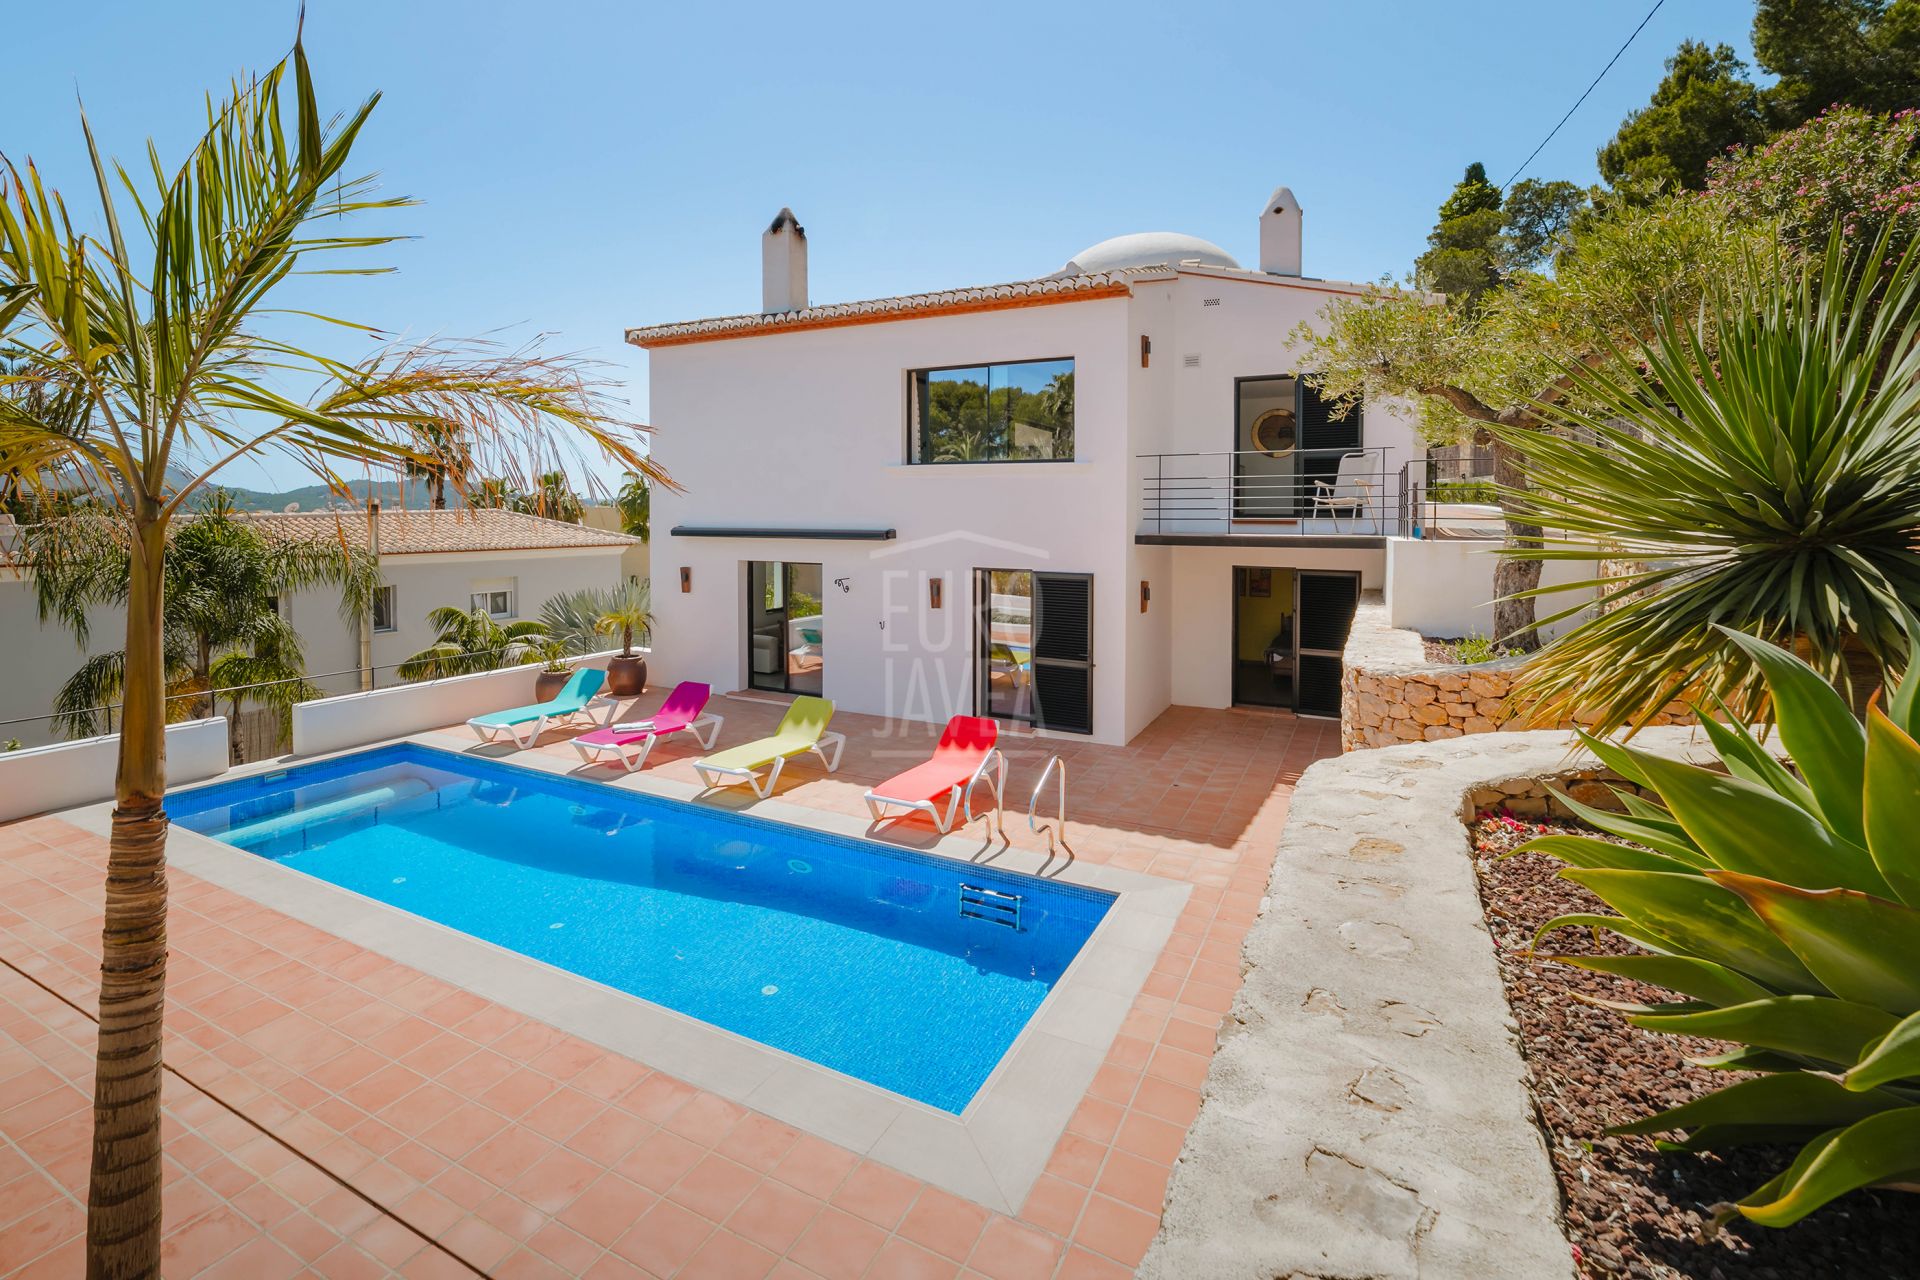 Exclusive villa for sale in Jávea with magnificent sea views walking distance to the port area